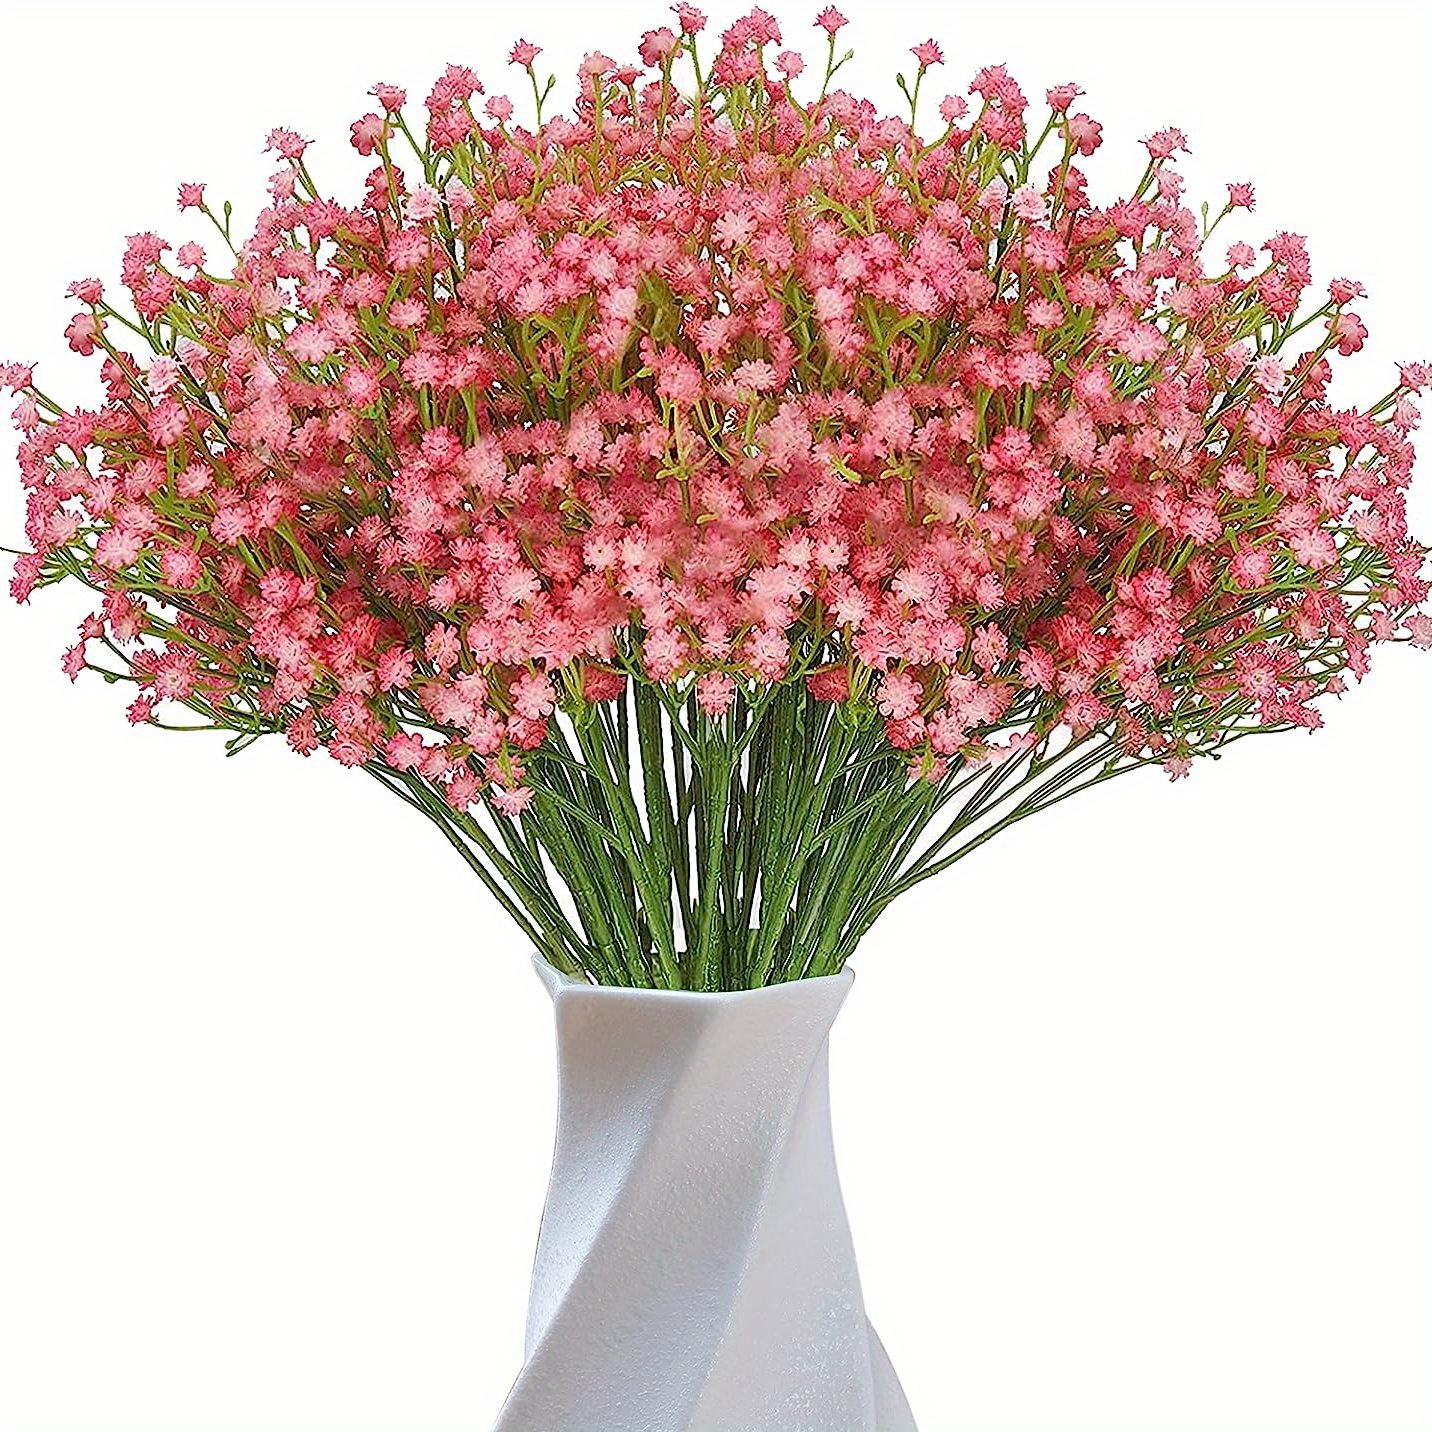  Baby's Breath Artificial Flowers Bulk 3 Branches 10